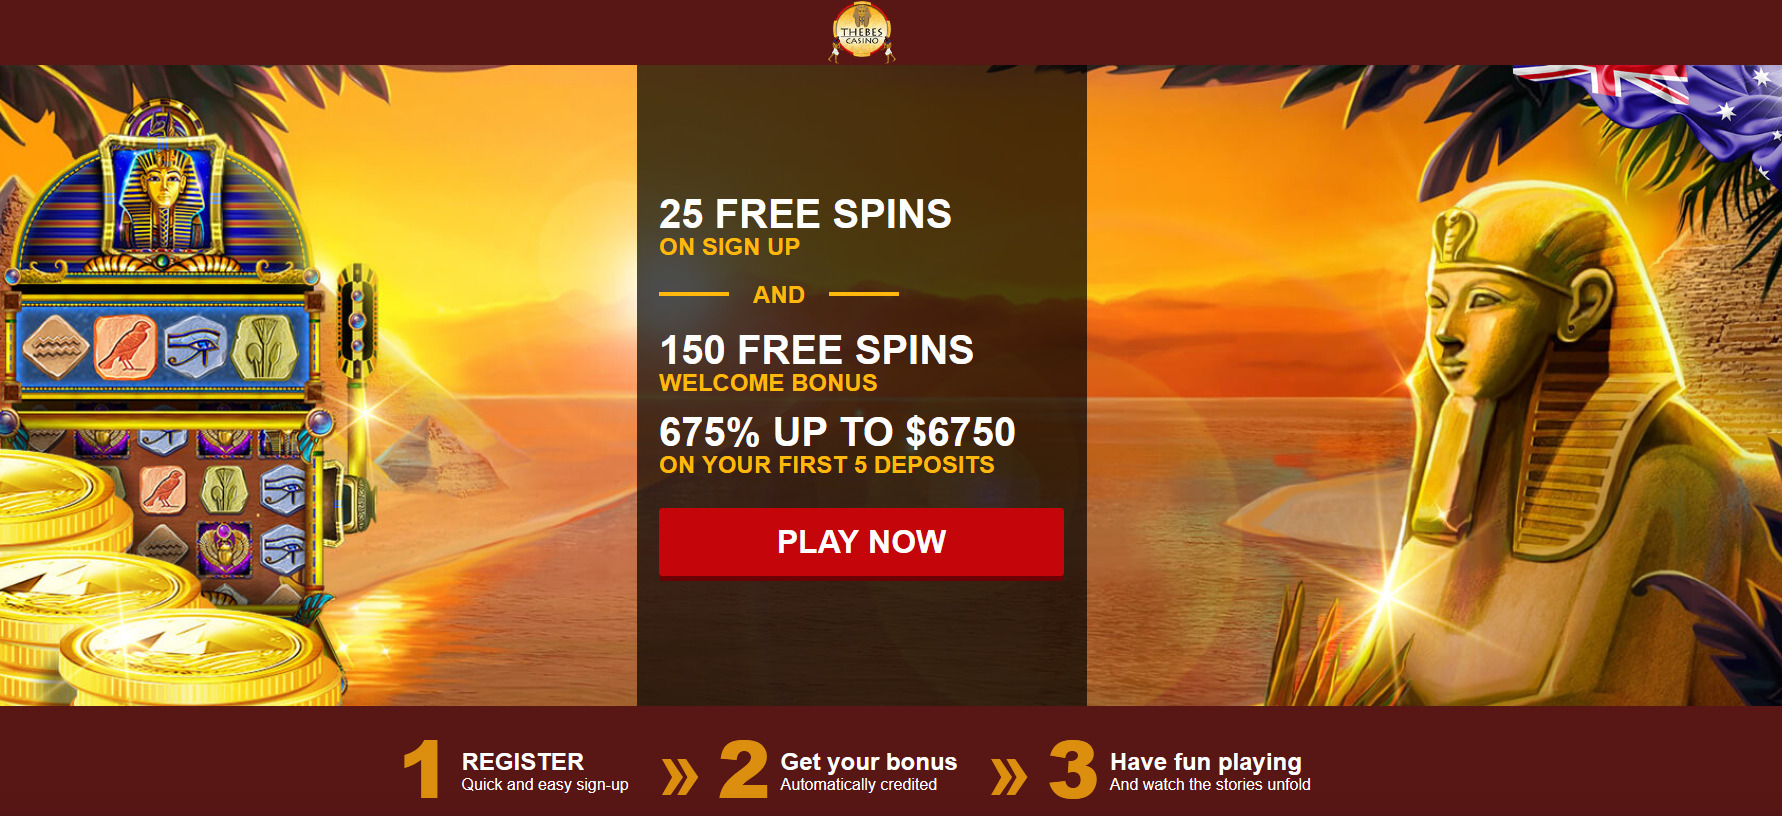 25 FREE SPINS ON SIGN UP AND 150 FREE SPINS WELCOME BONUS 675% UP TO $6750 ON YOUR FIRST 5 DEPOSITS